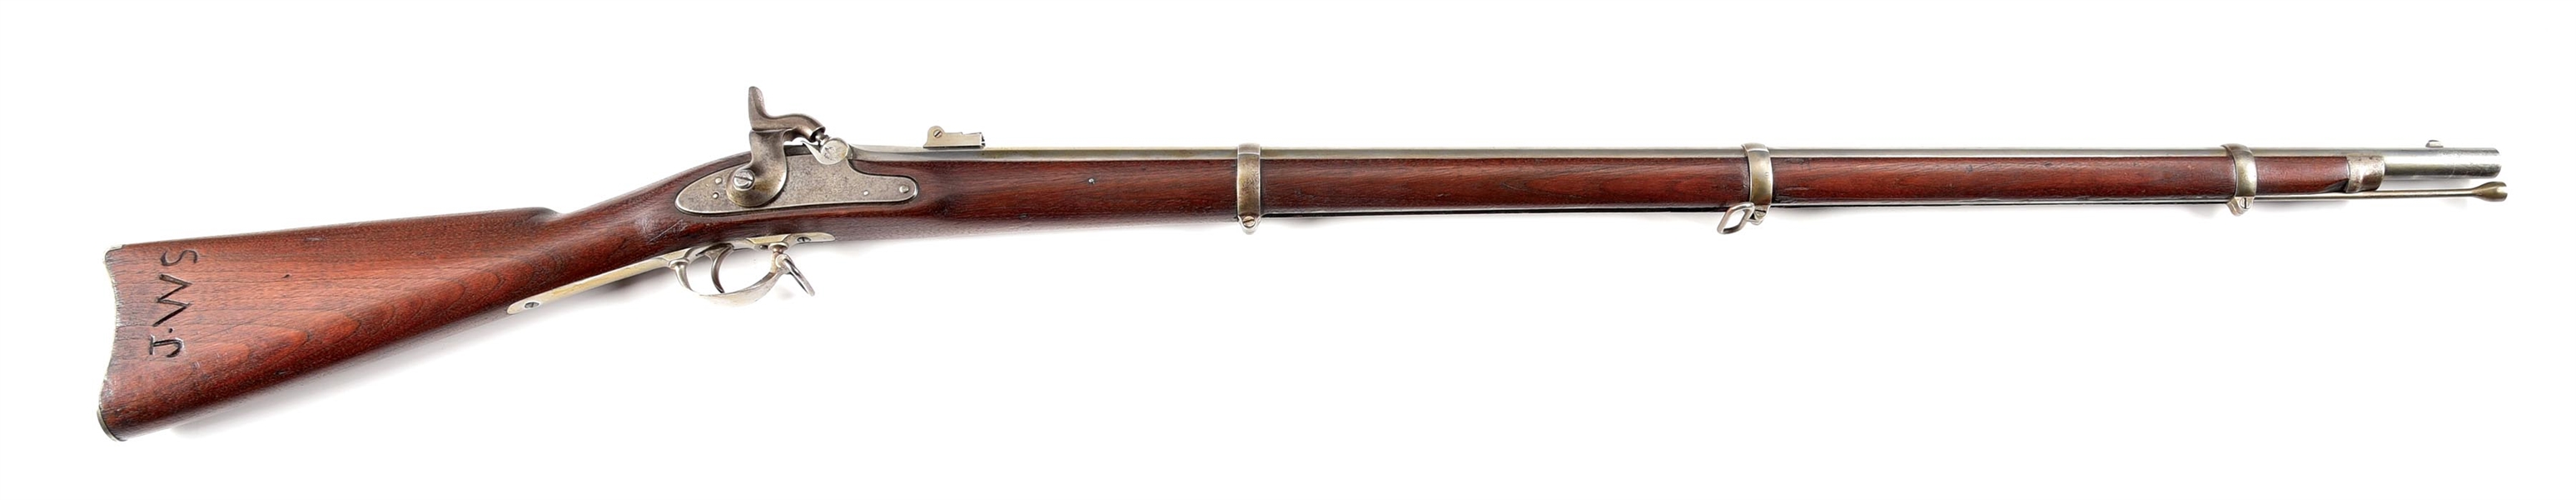 (A) INTERESTINGLY MARKED COLT 1861 SPECIAL RIFLED PERCUSSION MUSKET DATED 1864.